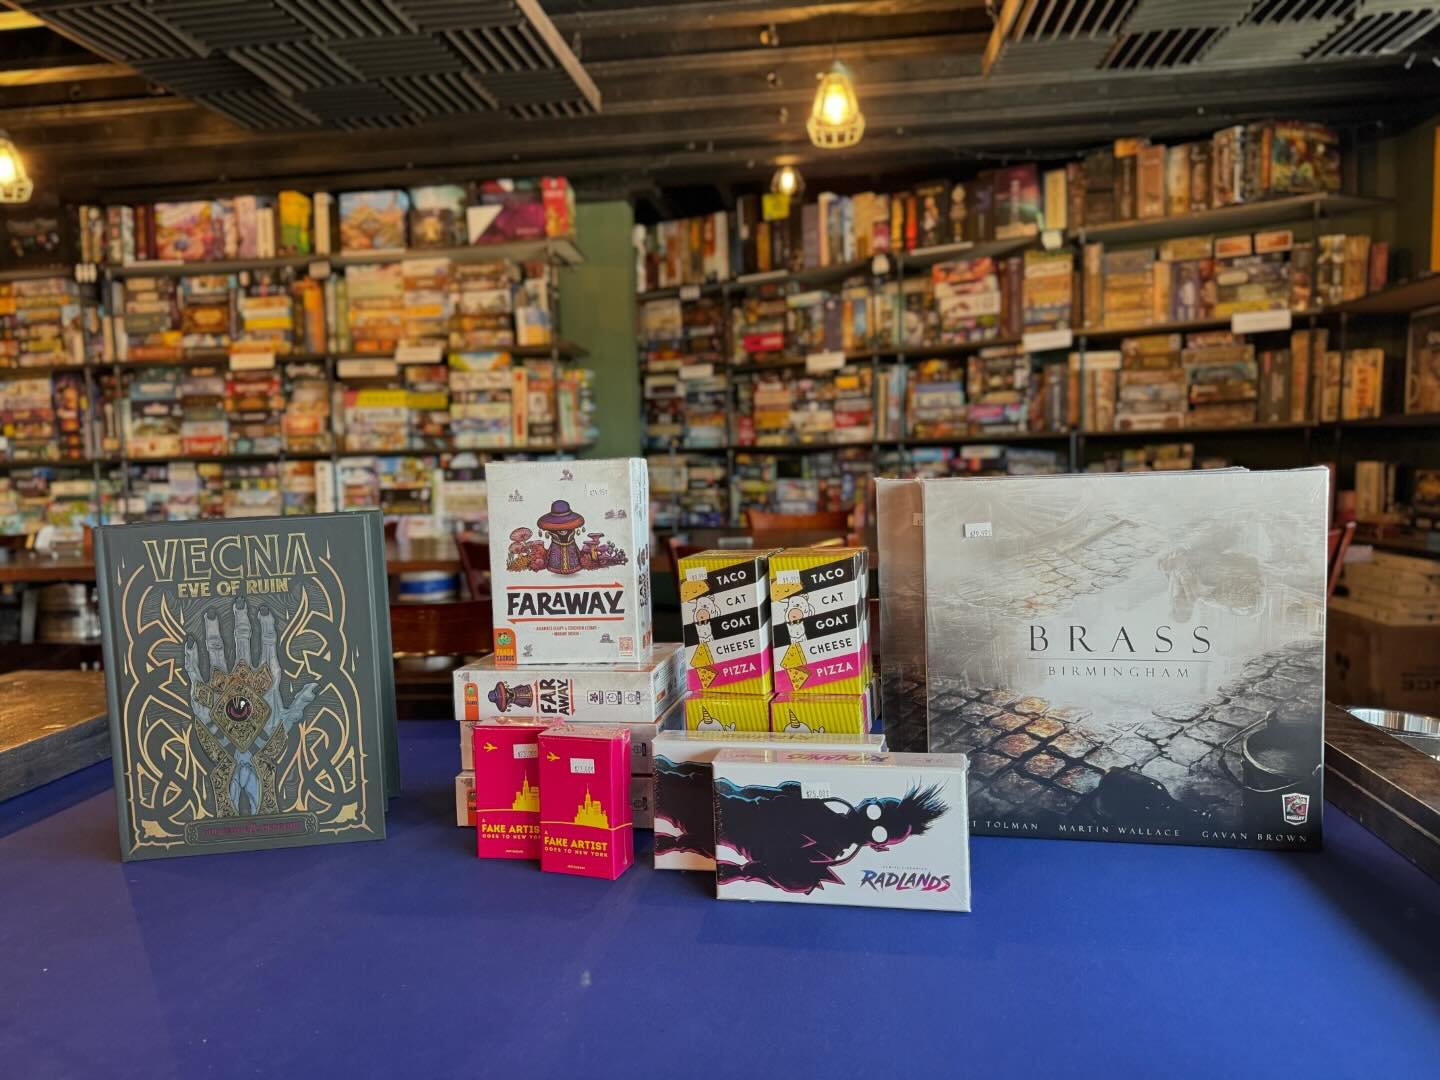 Some of the great deliveries that arrived this past week!
We added a copy of Faraway to the game library, it looks like a very fun light weight game.